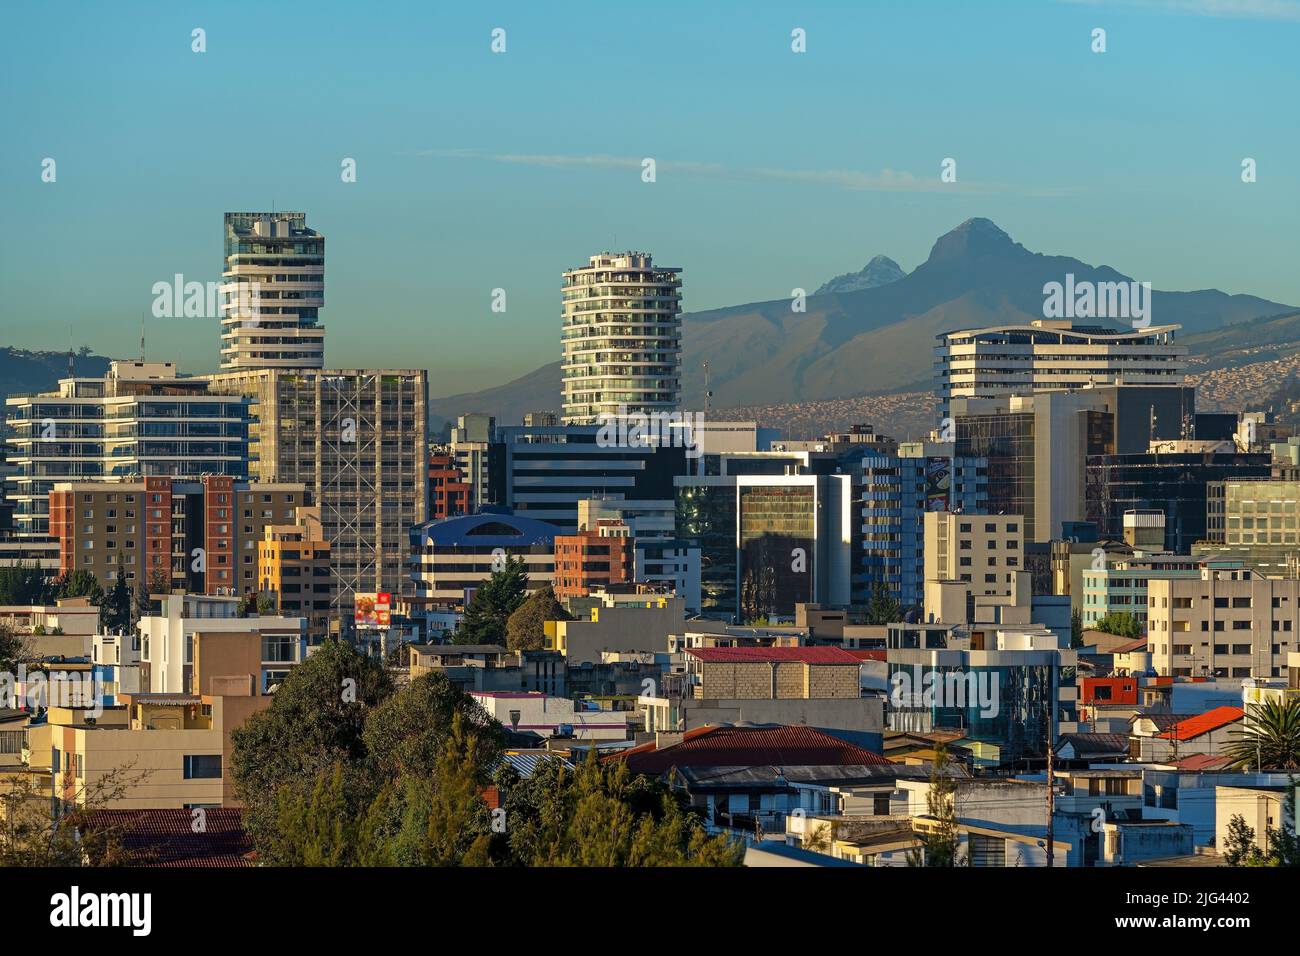 Quito city skyline with modern high rise buildings and the Corazon mountain peak, Ecuador. Stock Photo